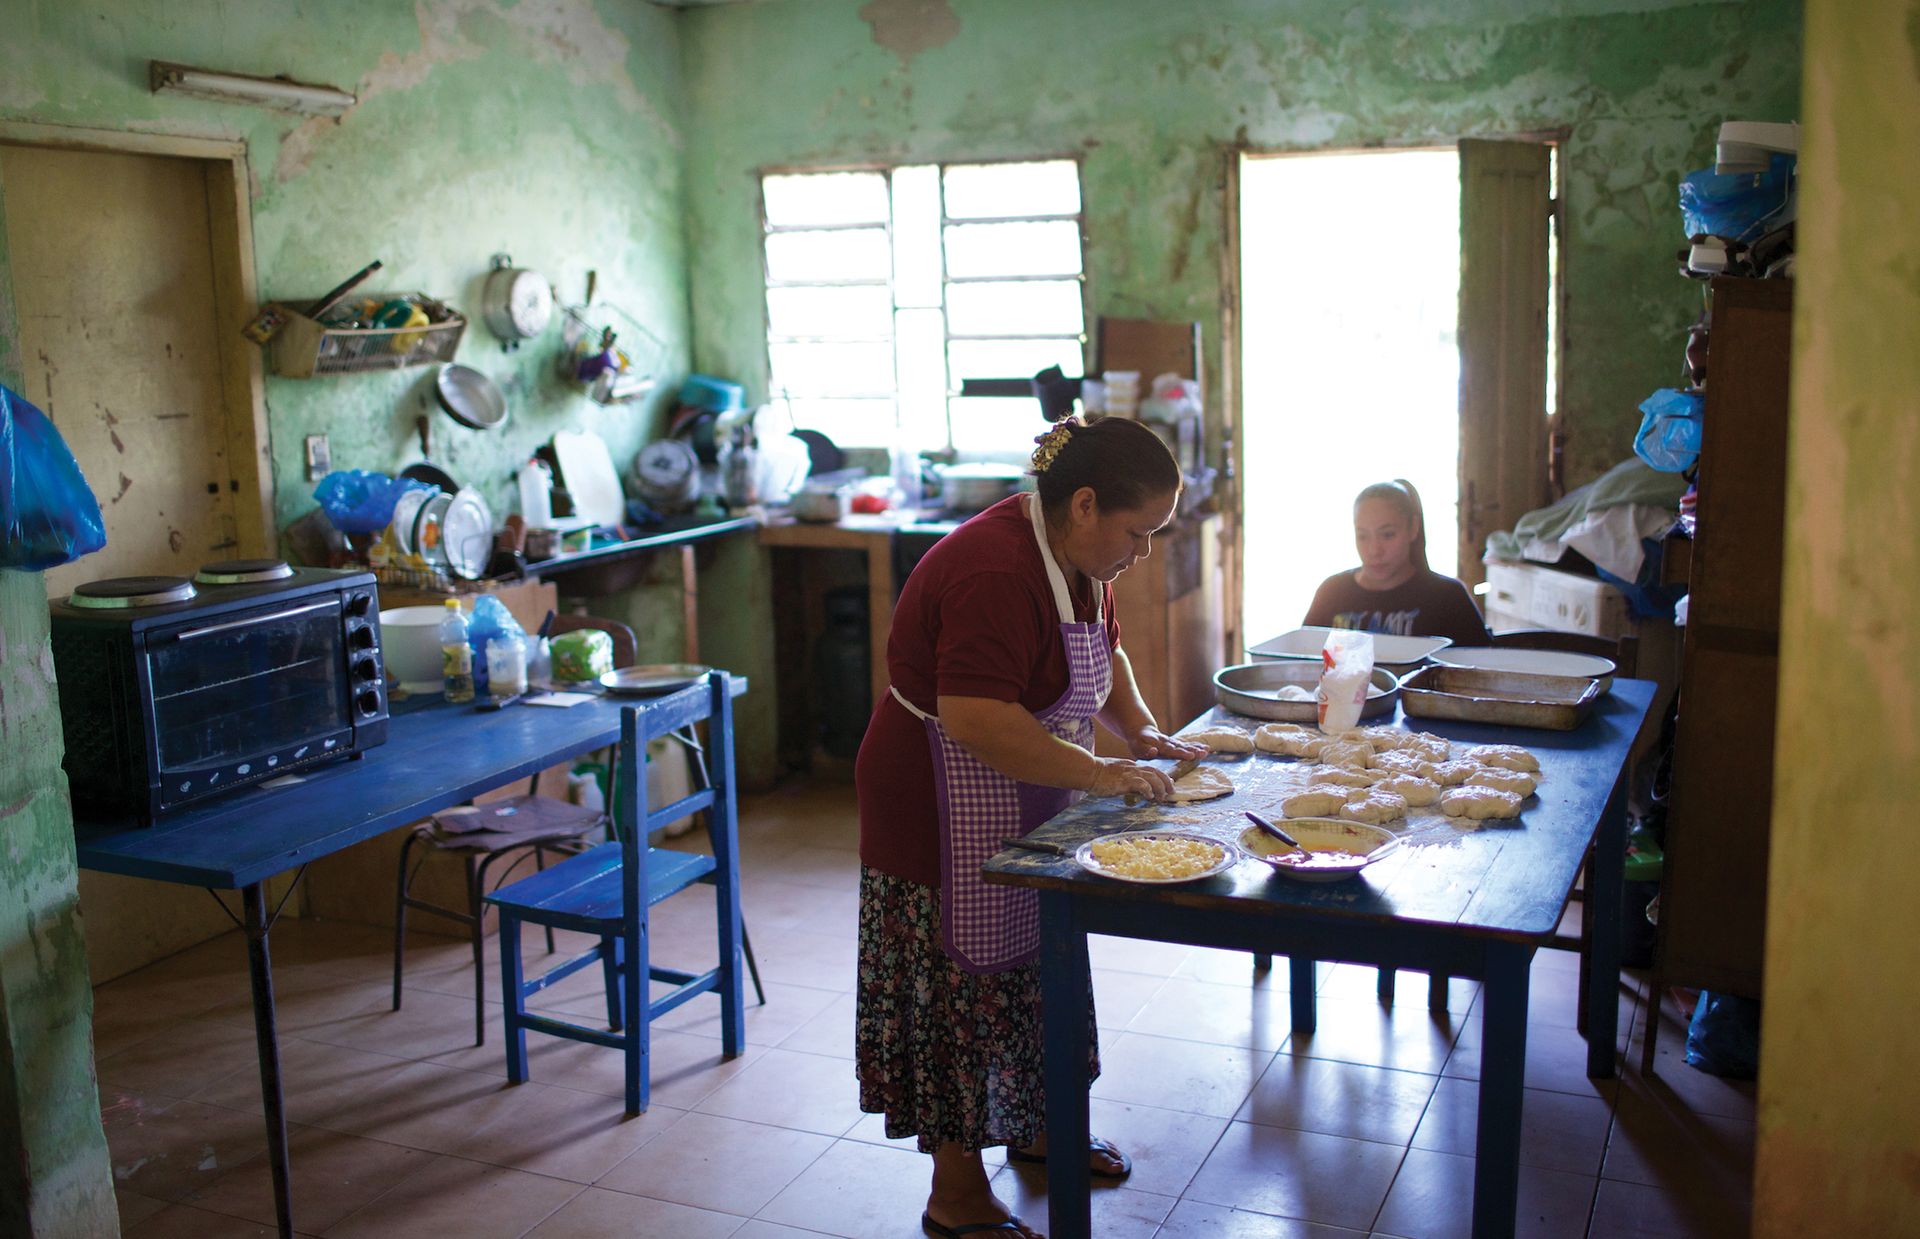 The day begins early for Adriana as she prepares dough for the bread she will bake and sell. All day long the kitchen table serves as a gathering place for the González family.